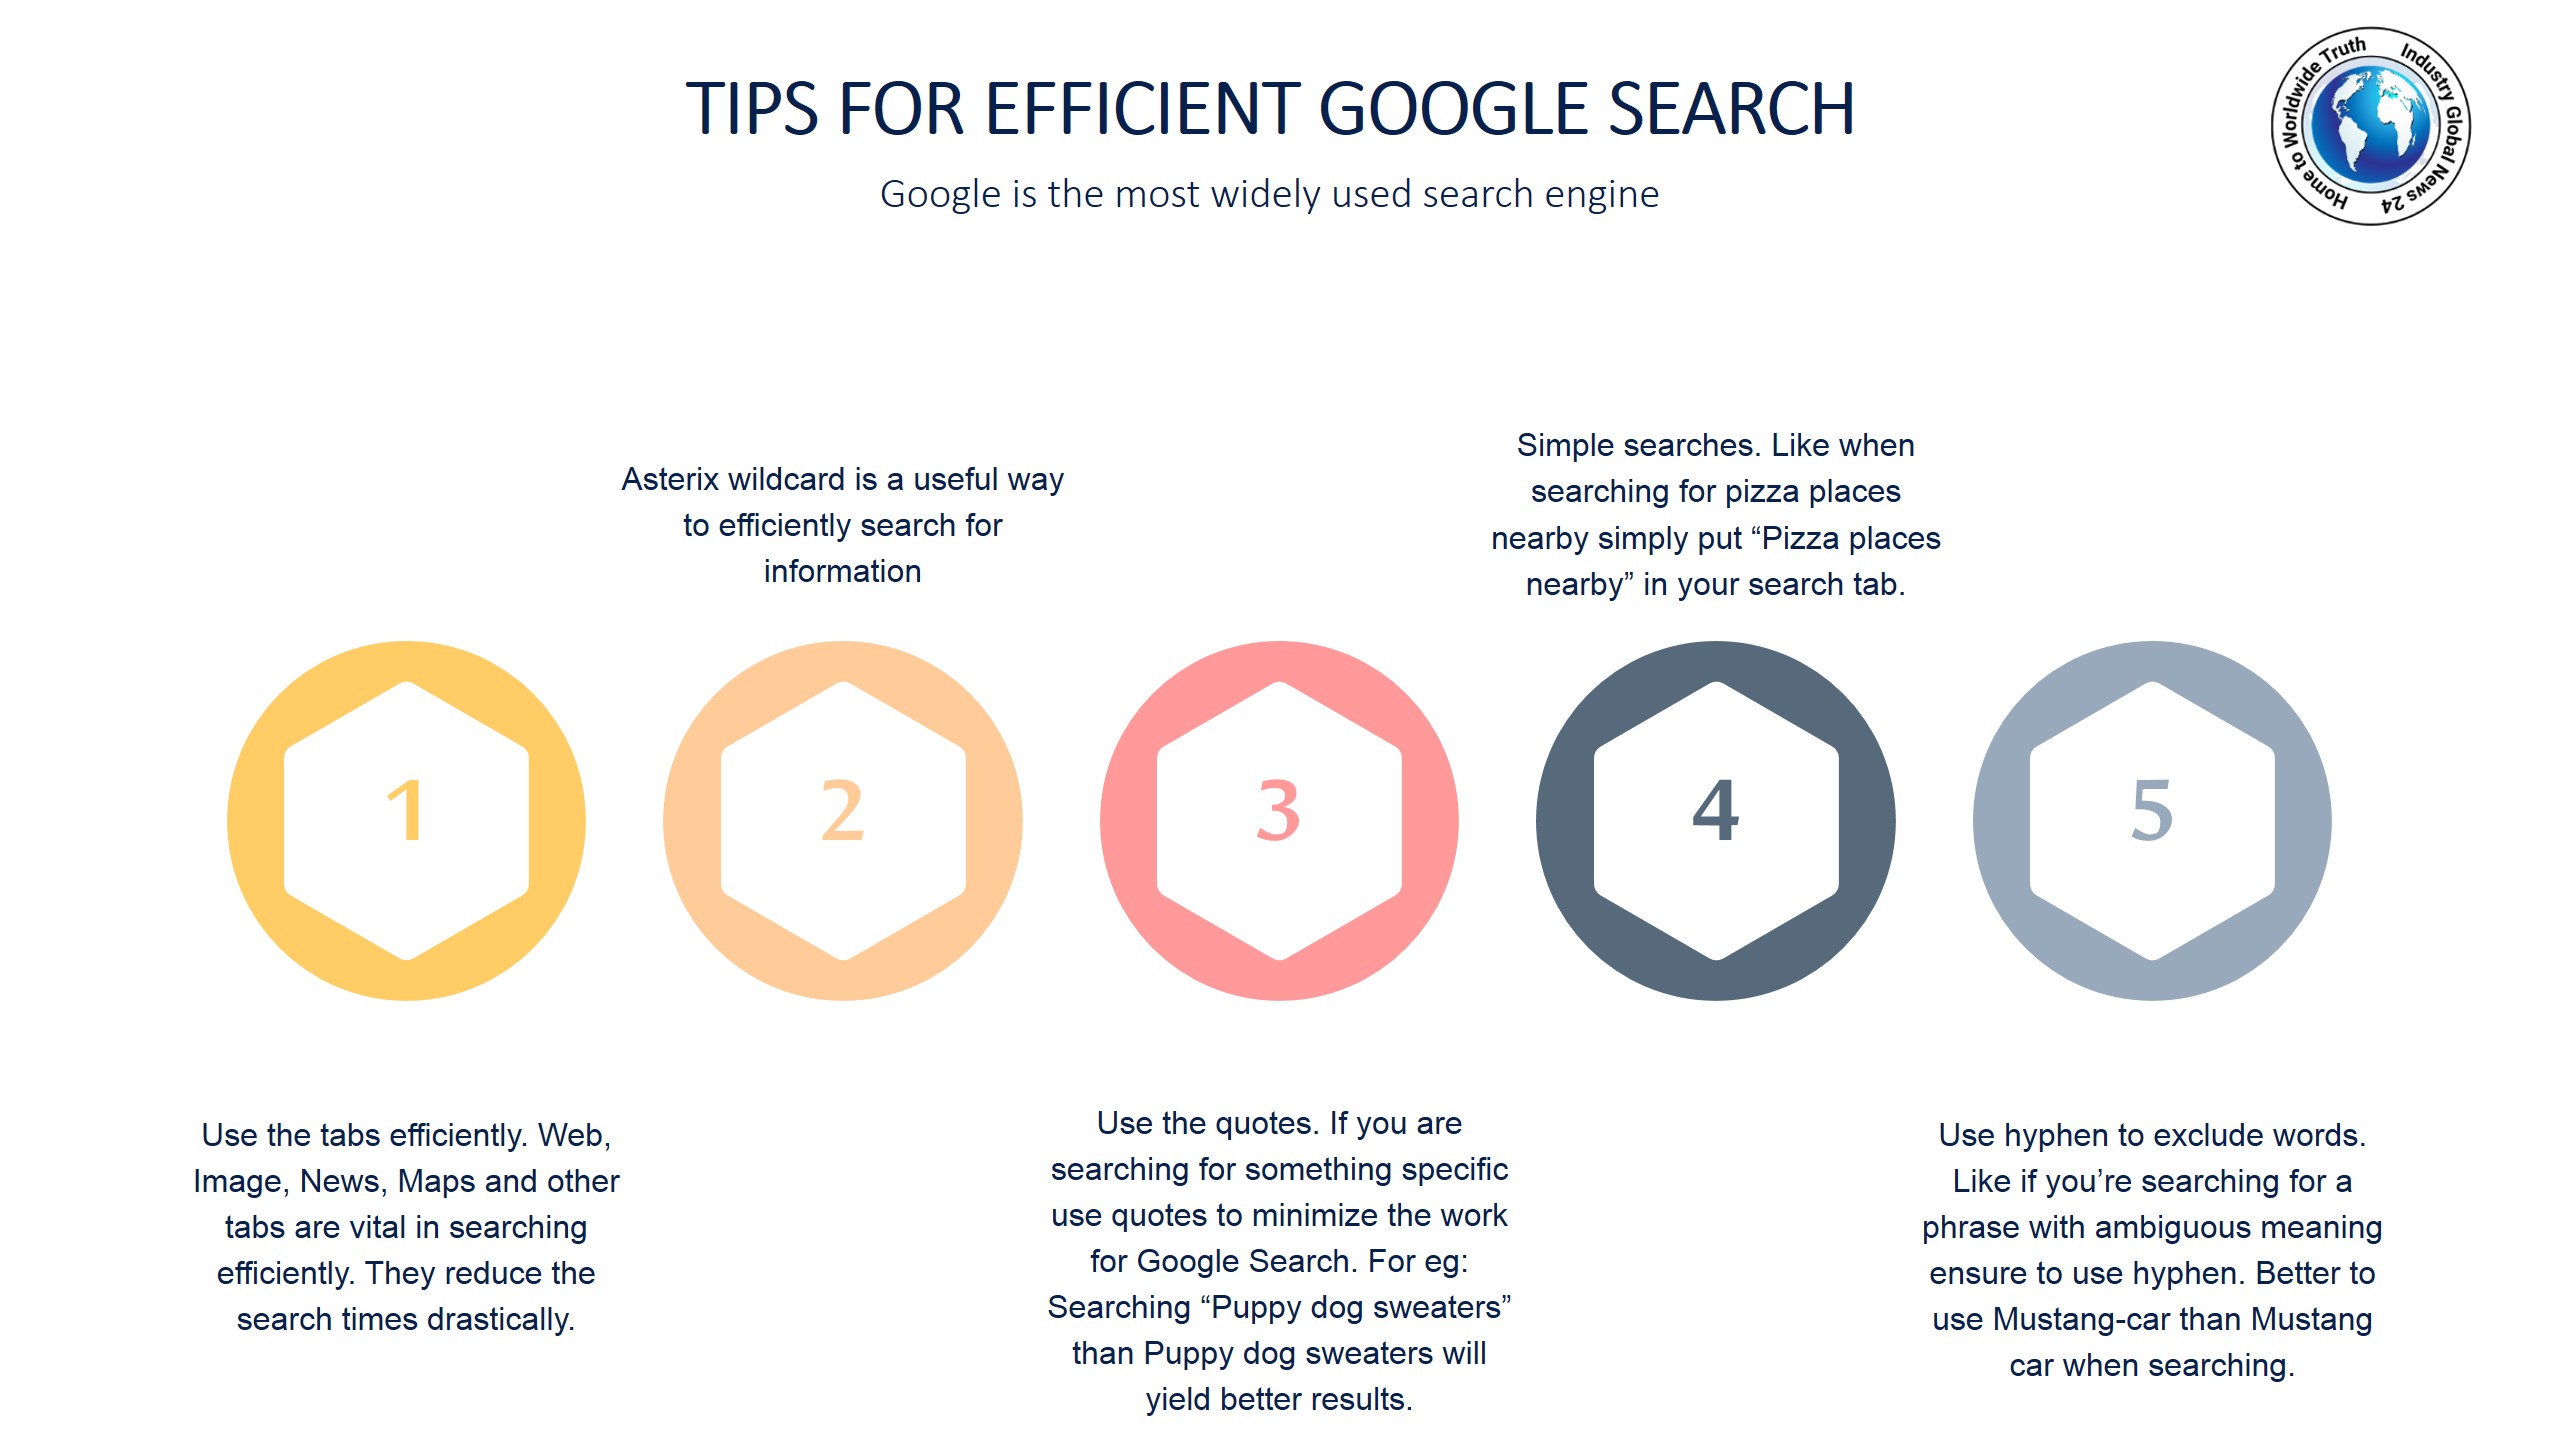 Tips for efficient Google search